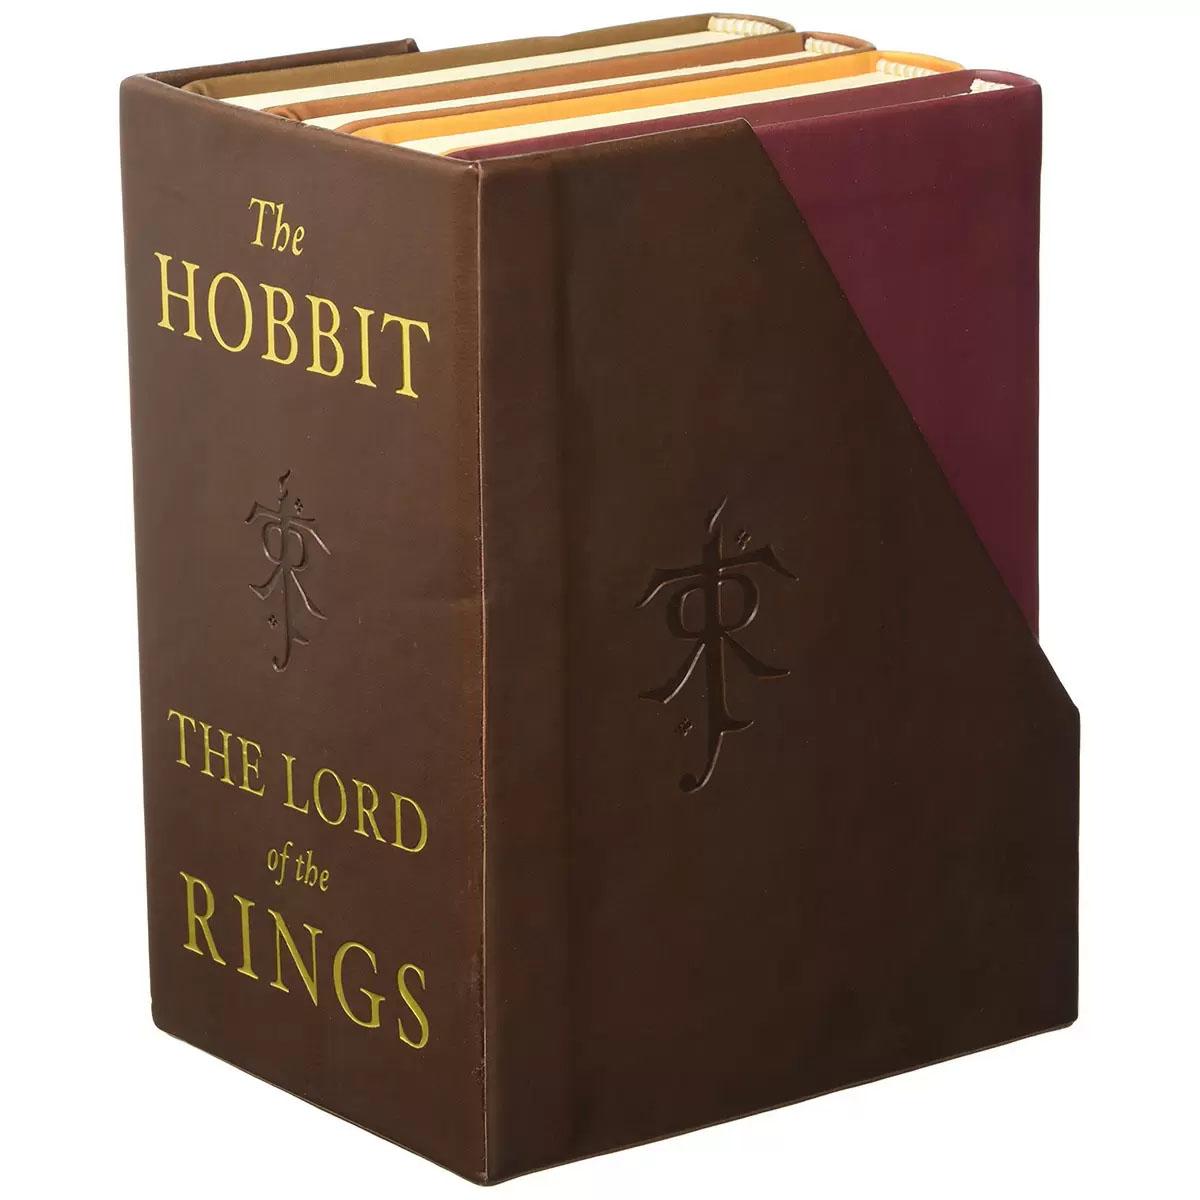 The Hobbit and The Lord of the Rings Deluxe Pocket Boxed Set for $20.99